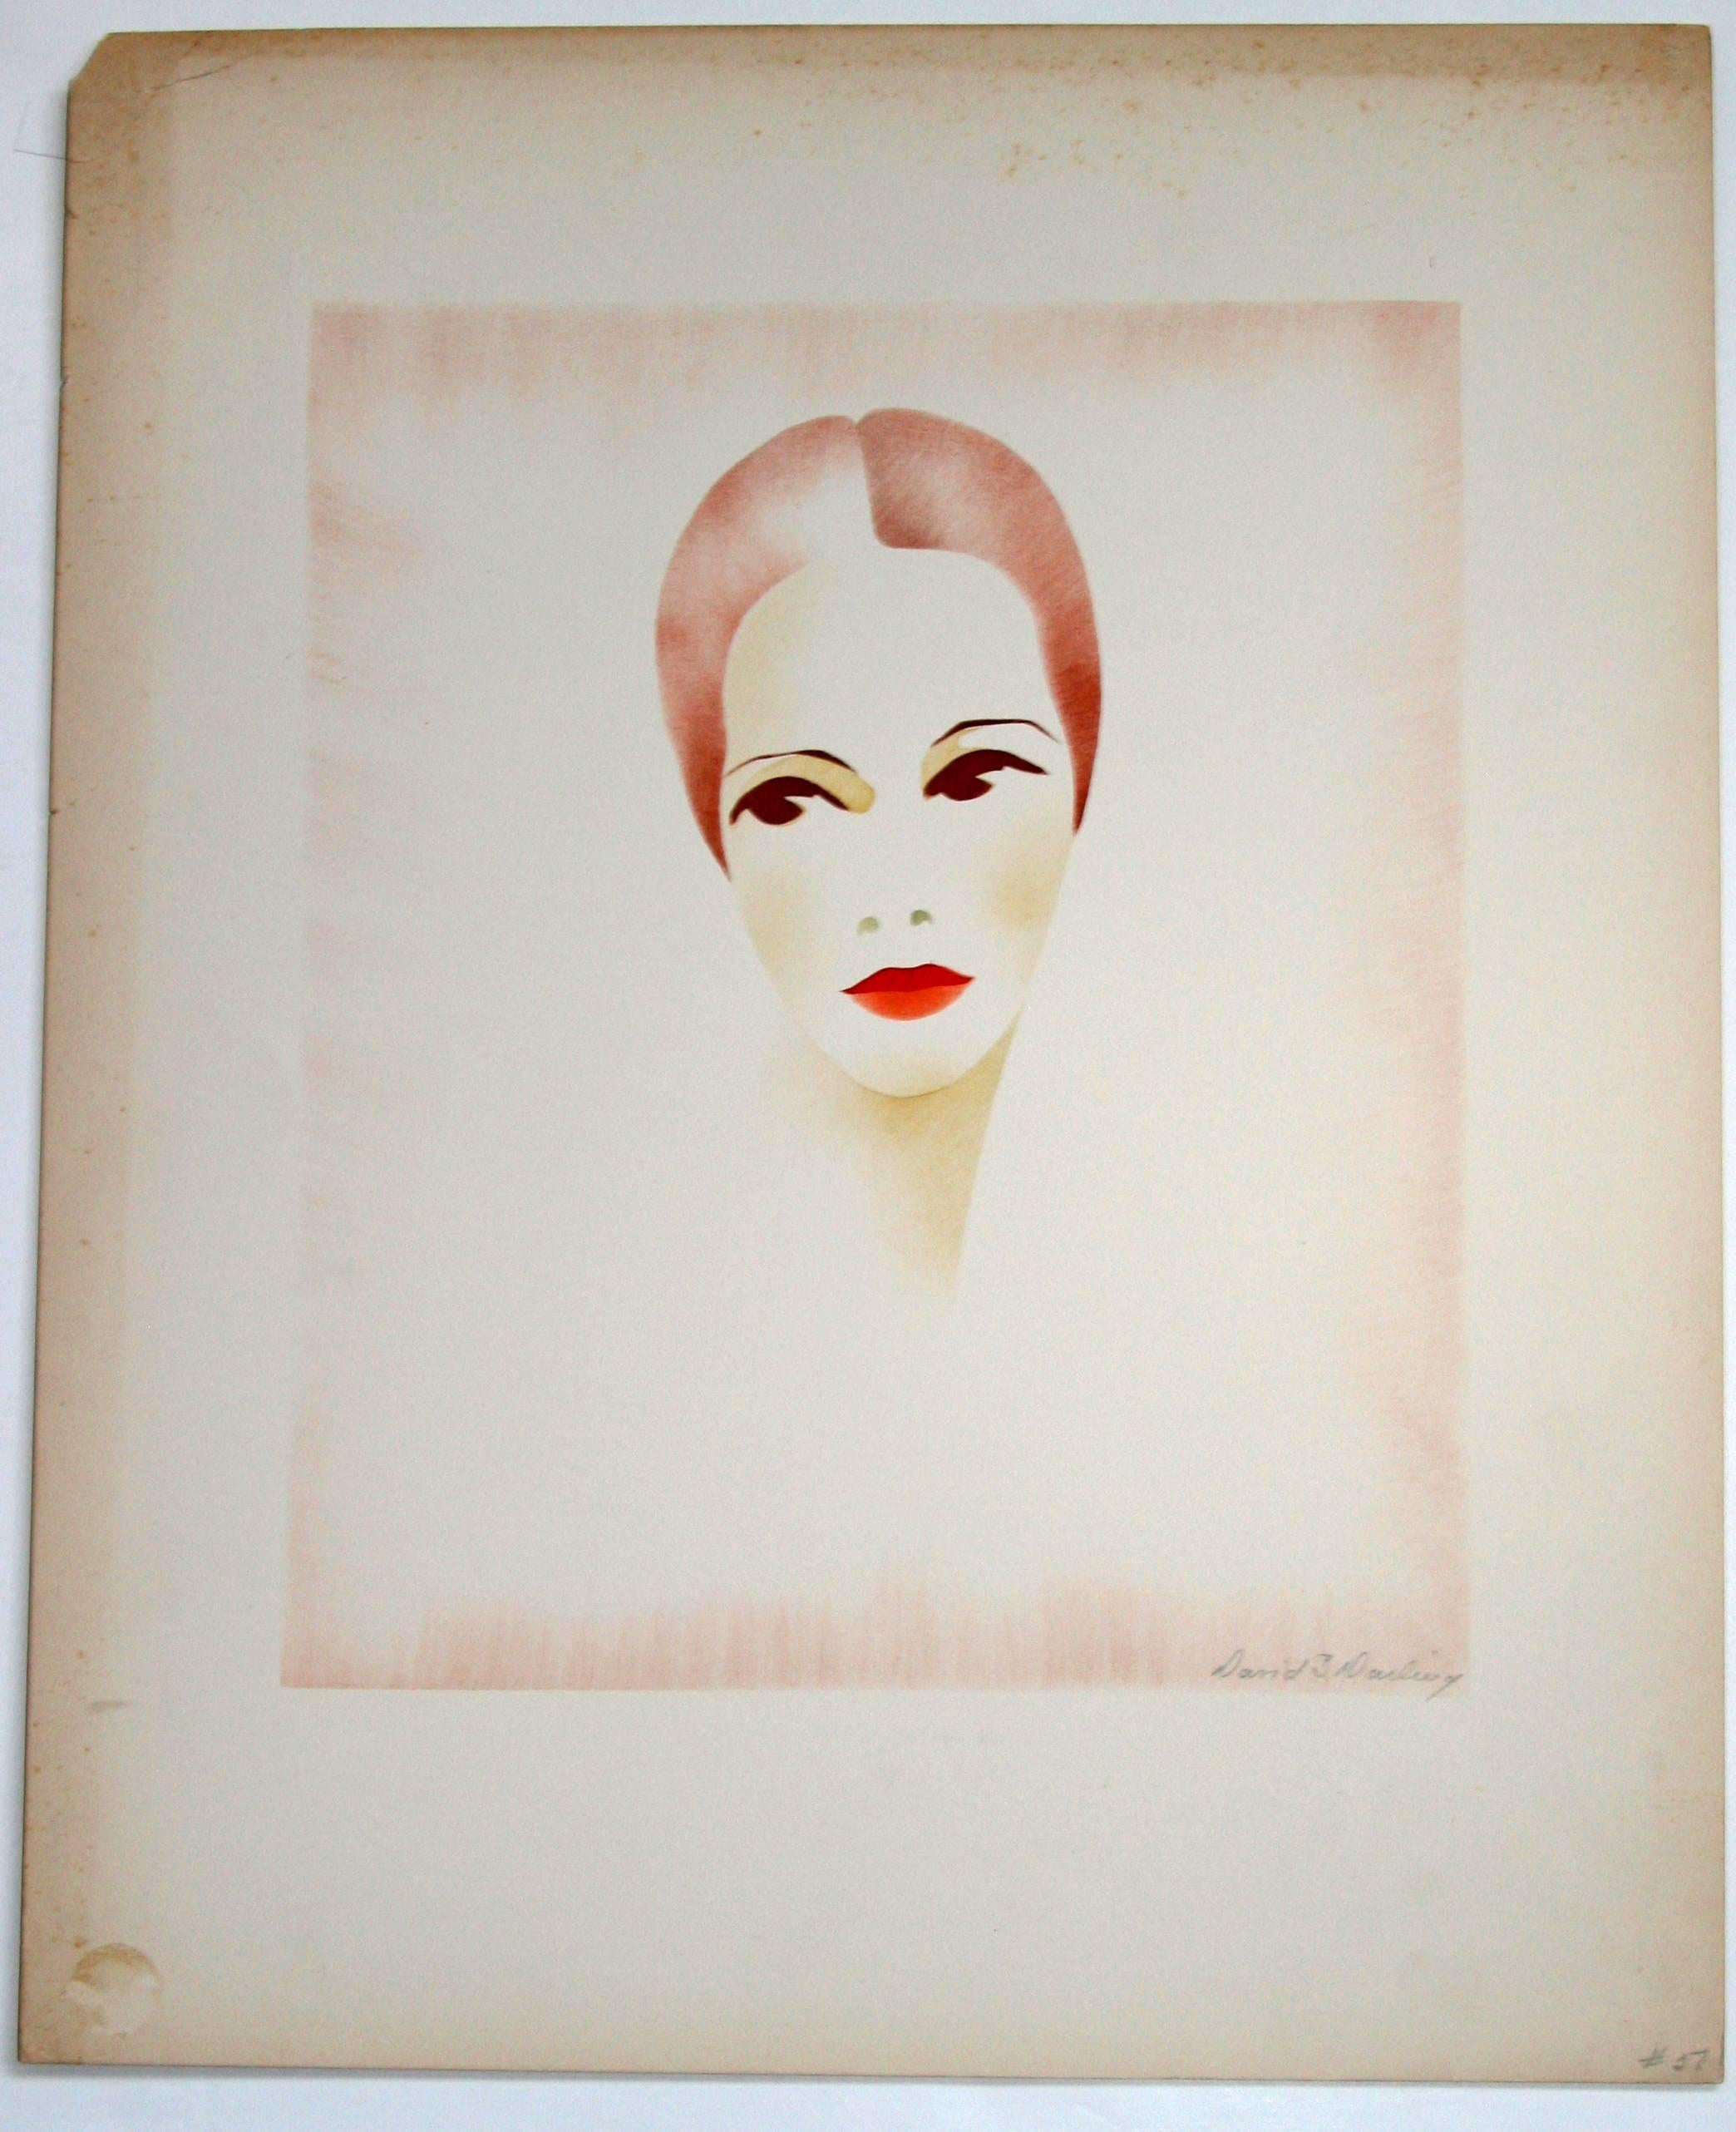 Portrait of the artist's wife, Mollie Shuger Darling. - Print by David T. Darling